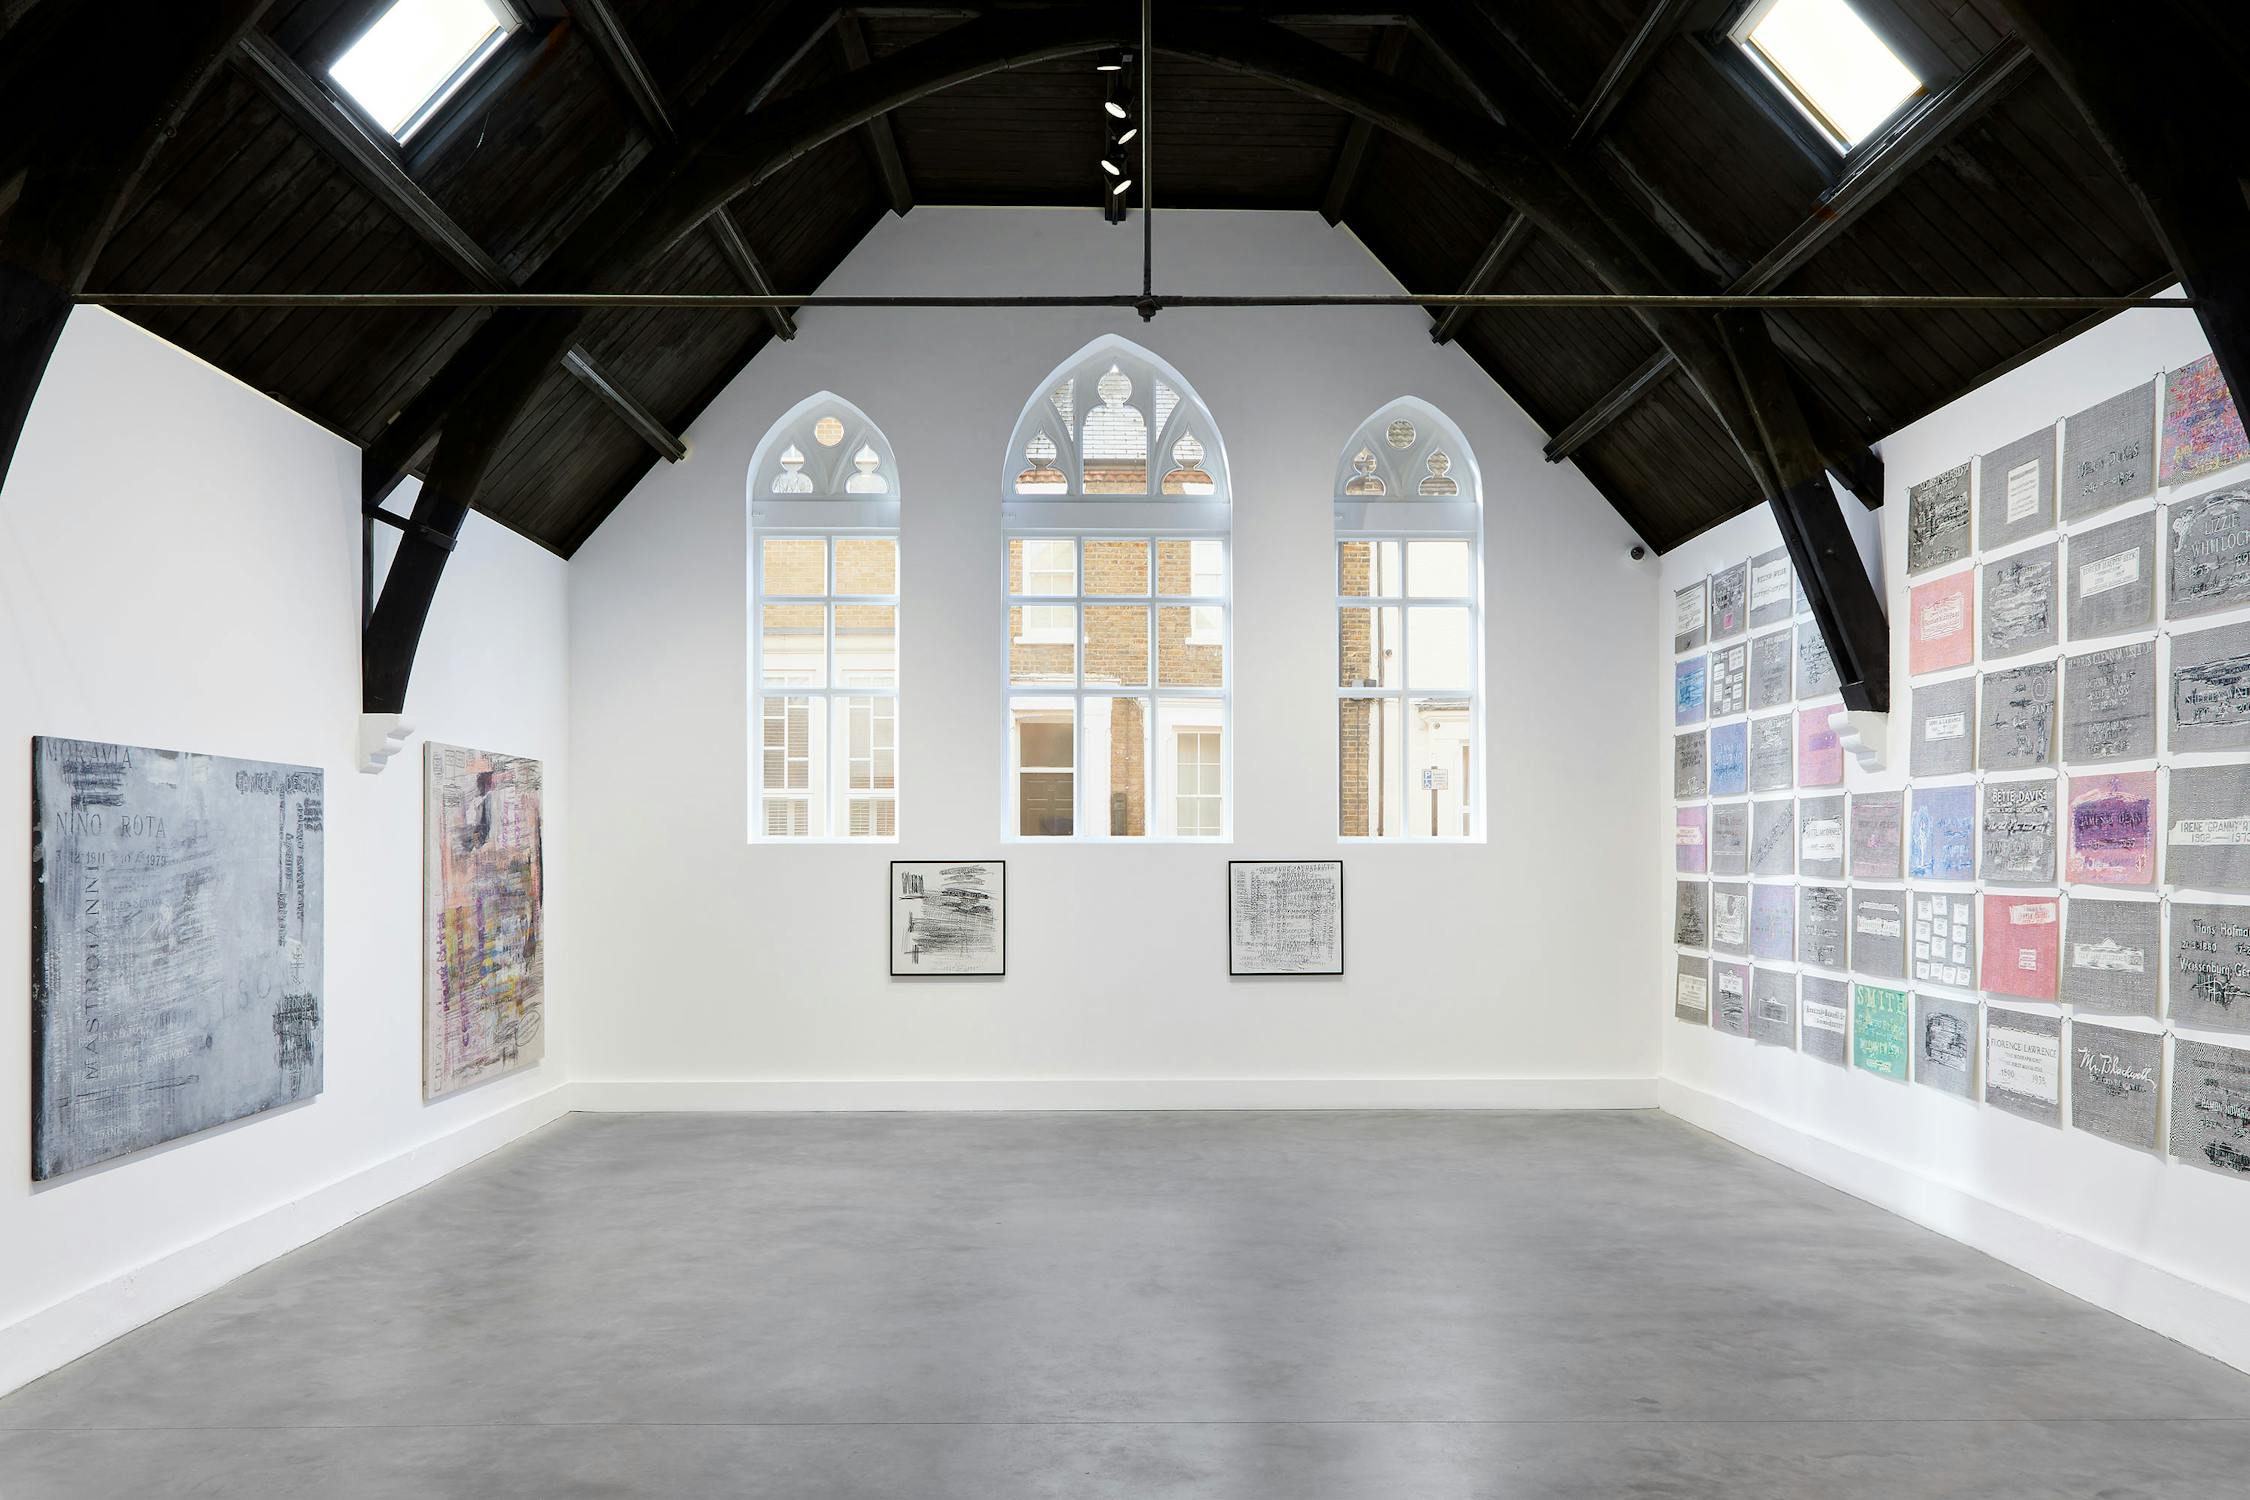 A gallery with white walls and a black vaulted ceiling. The walls are mounted with large chalf rubbings on canvas on the left and back wall. On the right wall there is a grid of smaller pencil drawings.